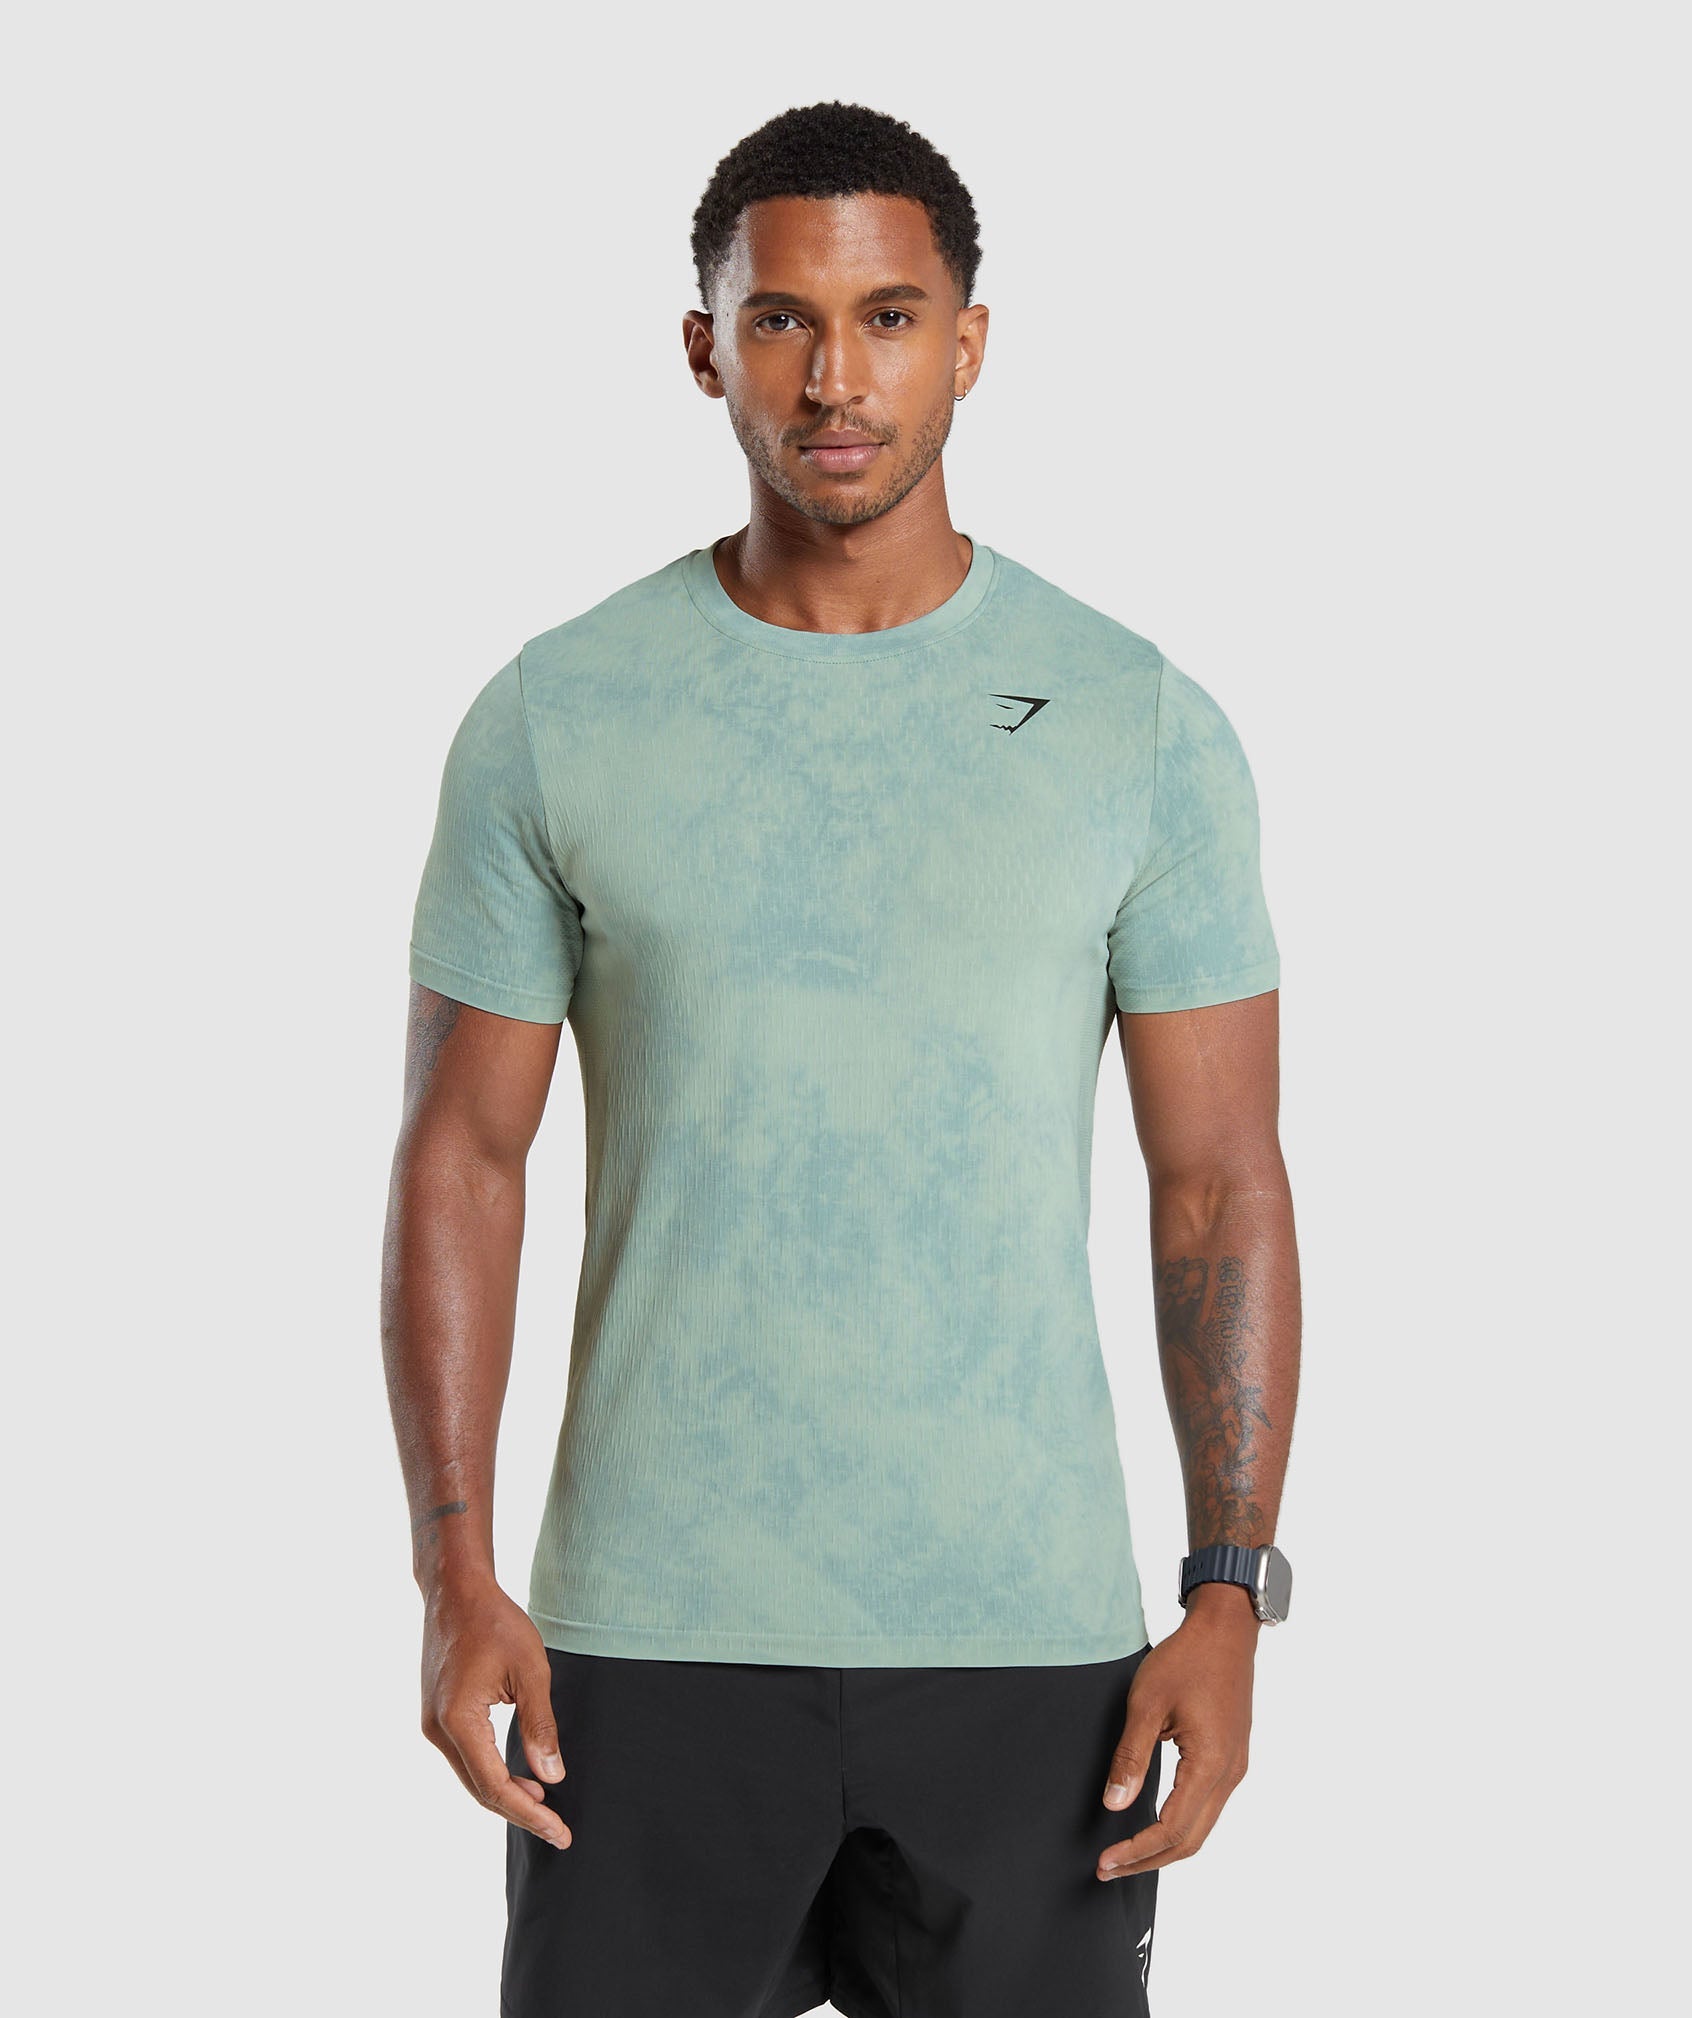 Gymshark Arrival T-Shirt - Toasted Brown